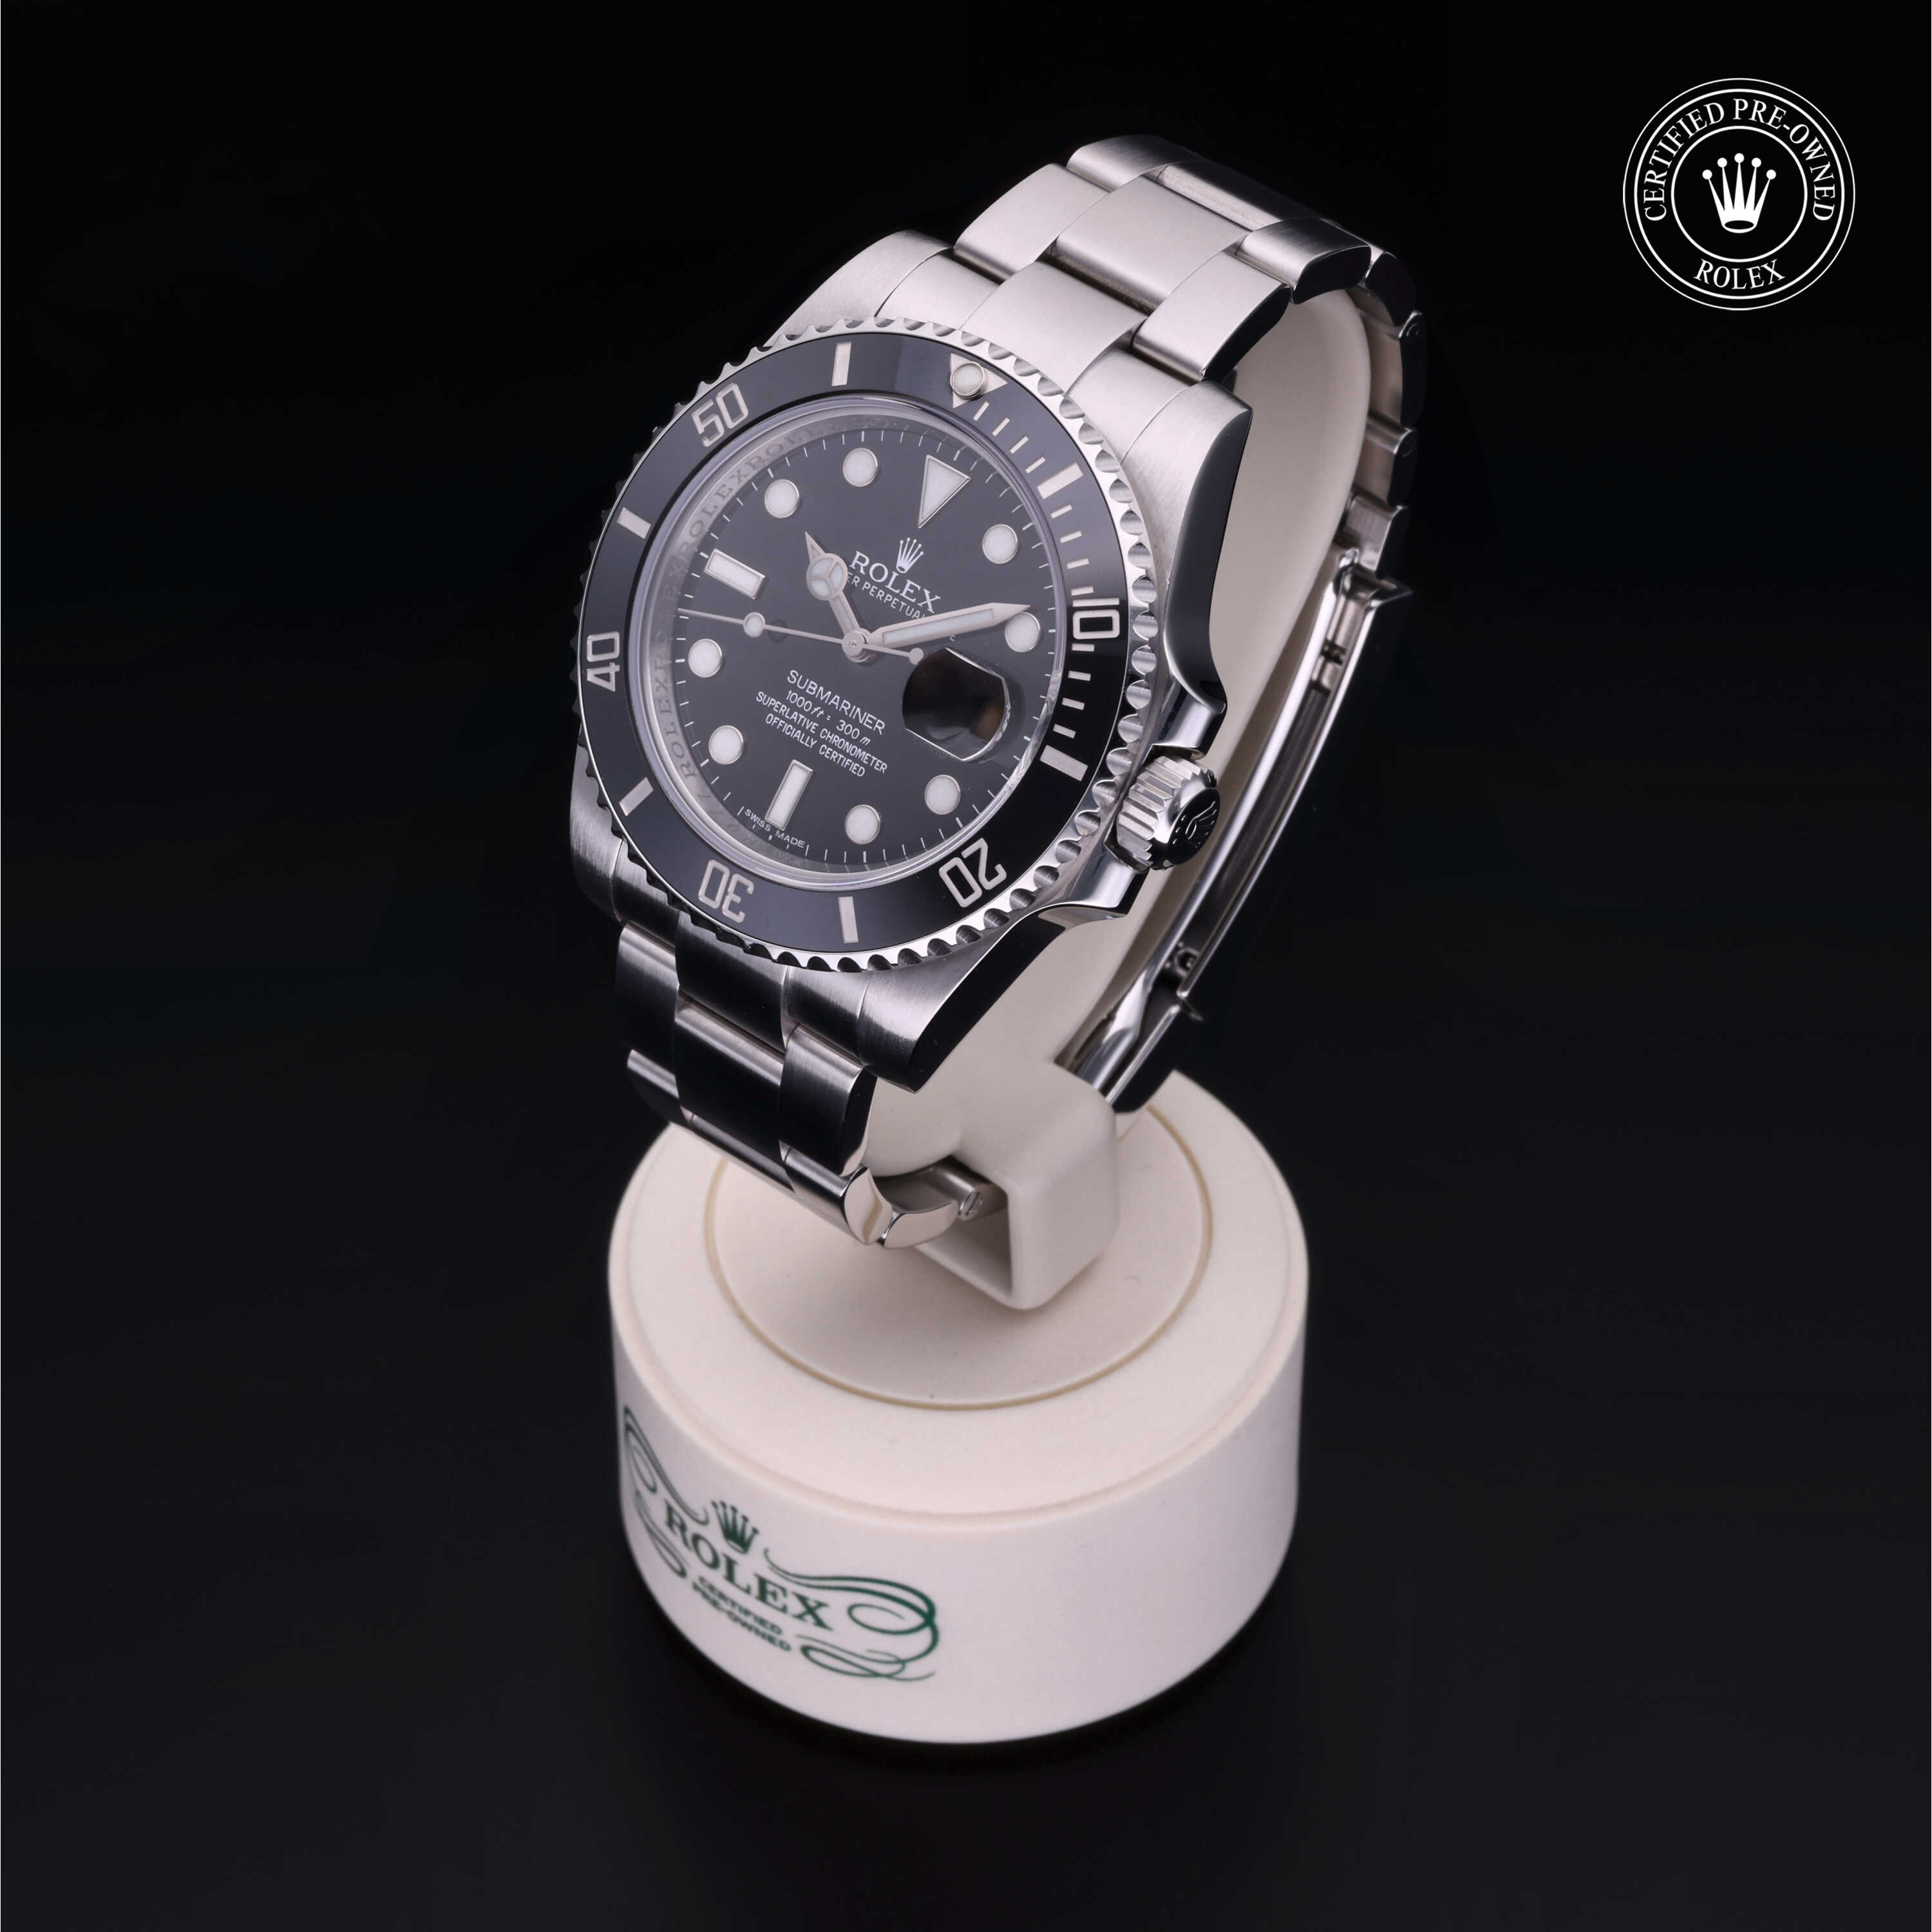 Rolex Certified Pre-Owned Submariner (116610LN)